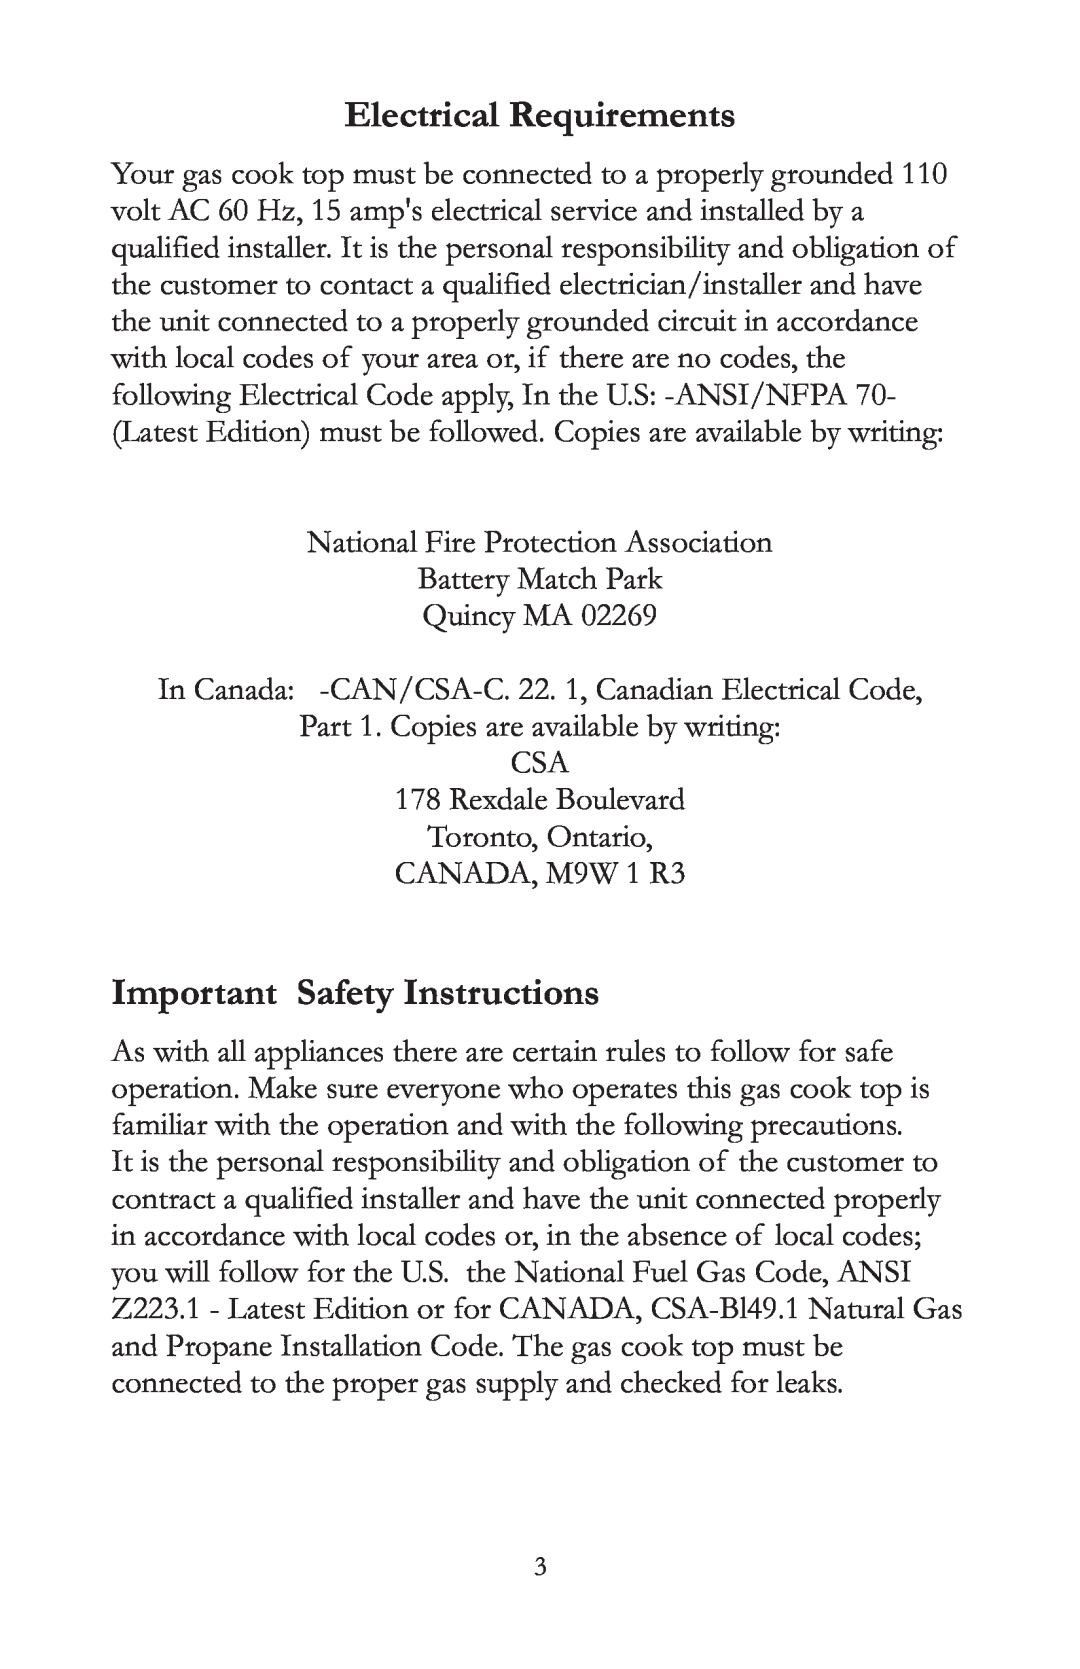 Caldera SSK305NG-US manual Electrical Requirements, Important Safety Instructions, National Fire Protection Association 